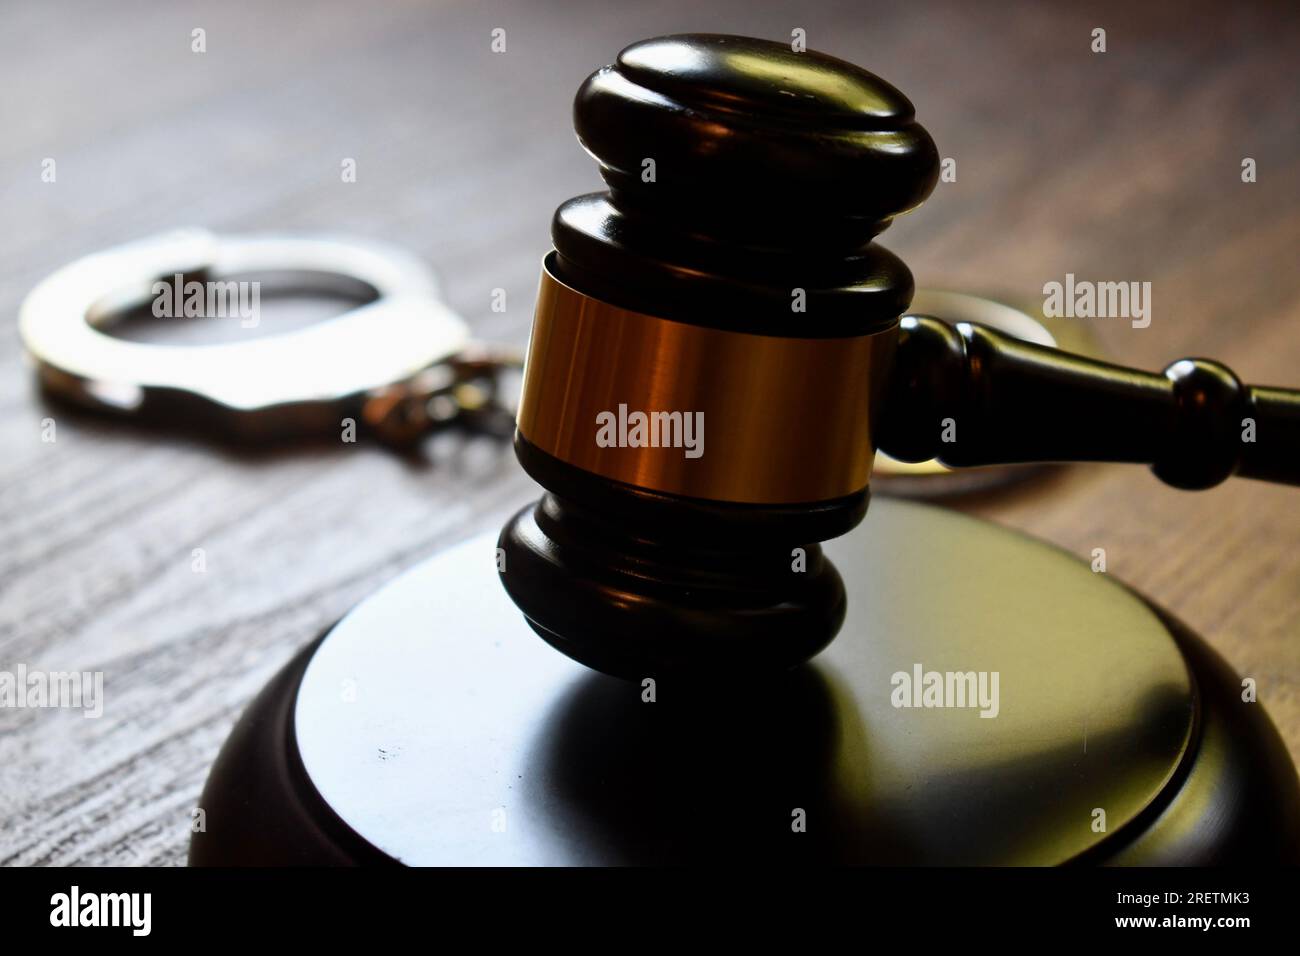 Judge’s gavel and block with handcuffs on a dark wooden table Stock Photo